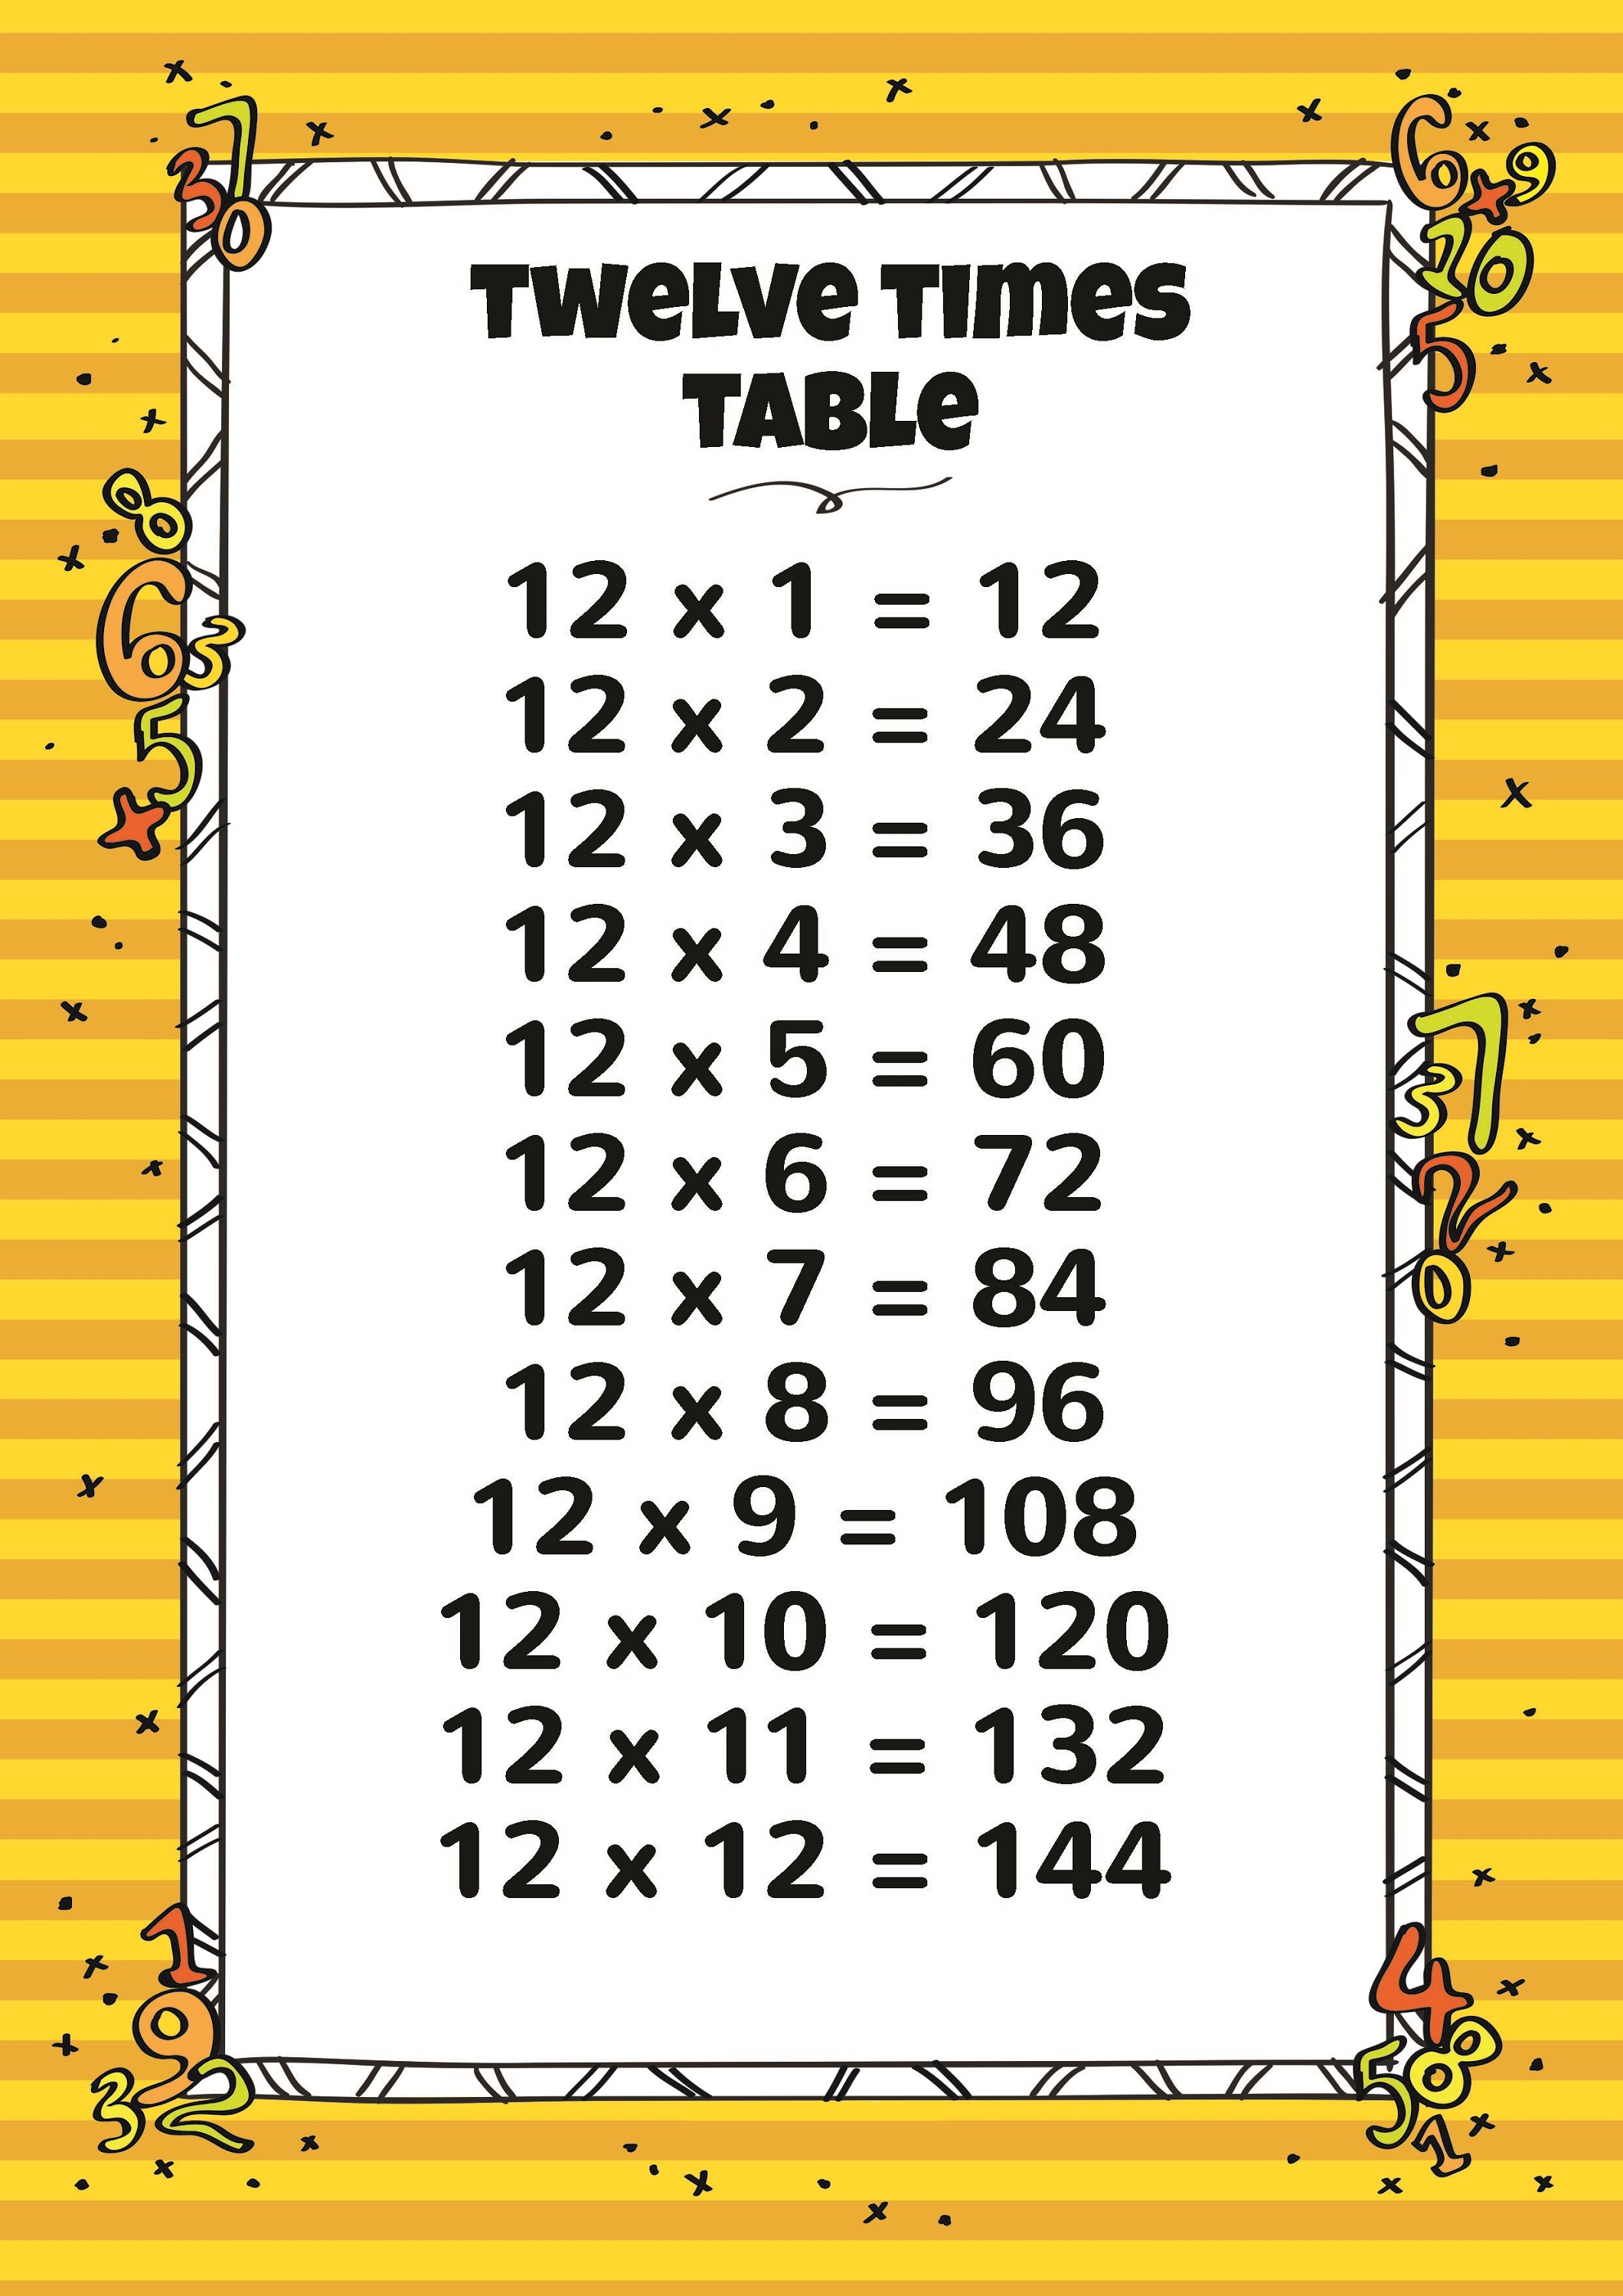 12 table up to 20